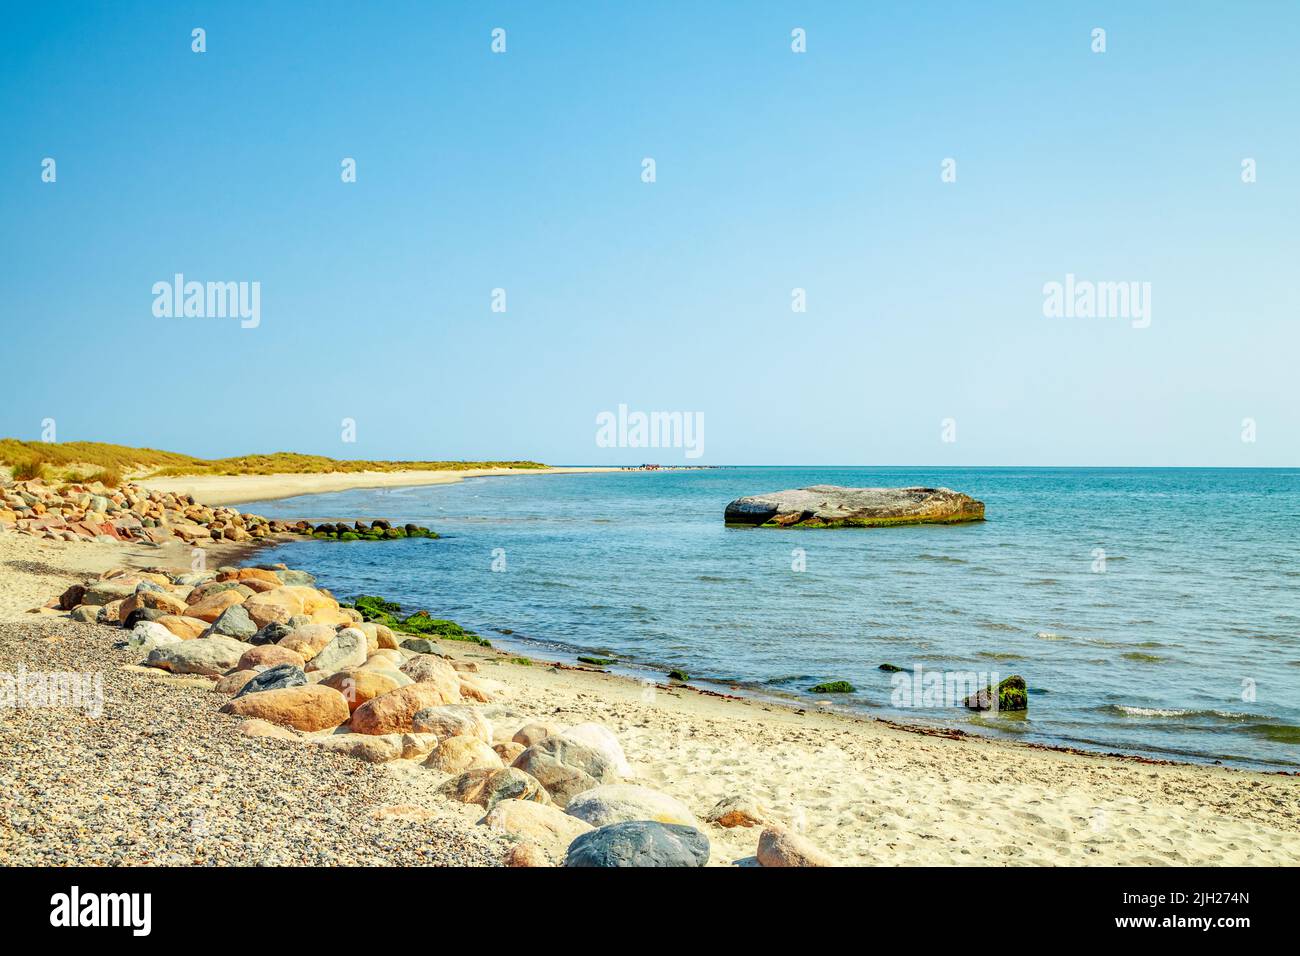 View over the beach and the Ocean in Skagen, Denmark Stock Photo